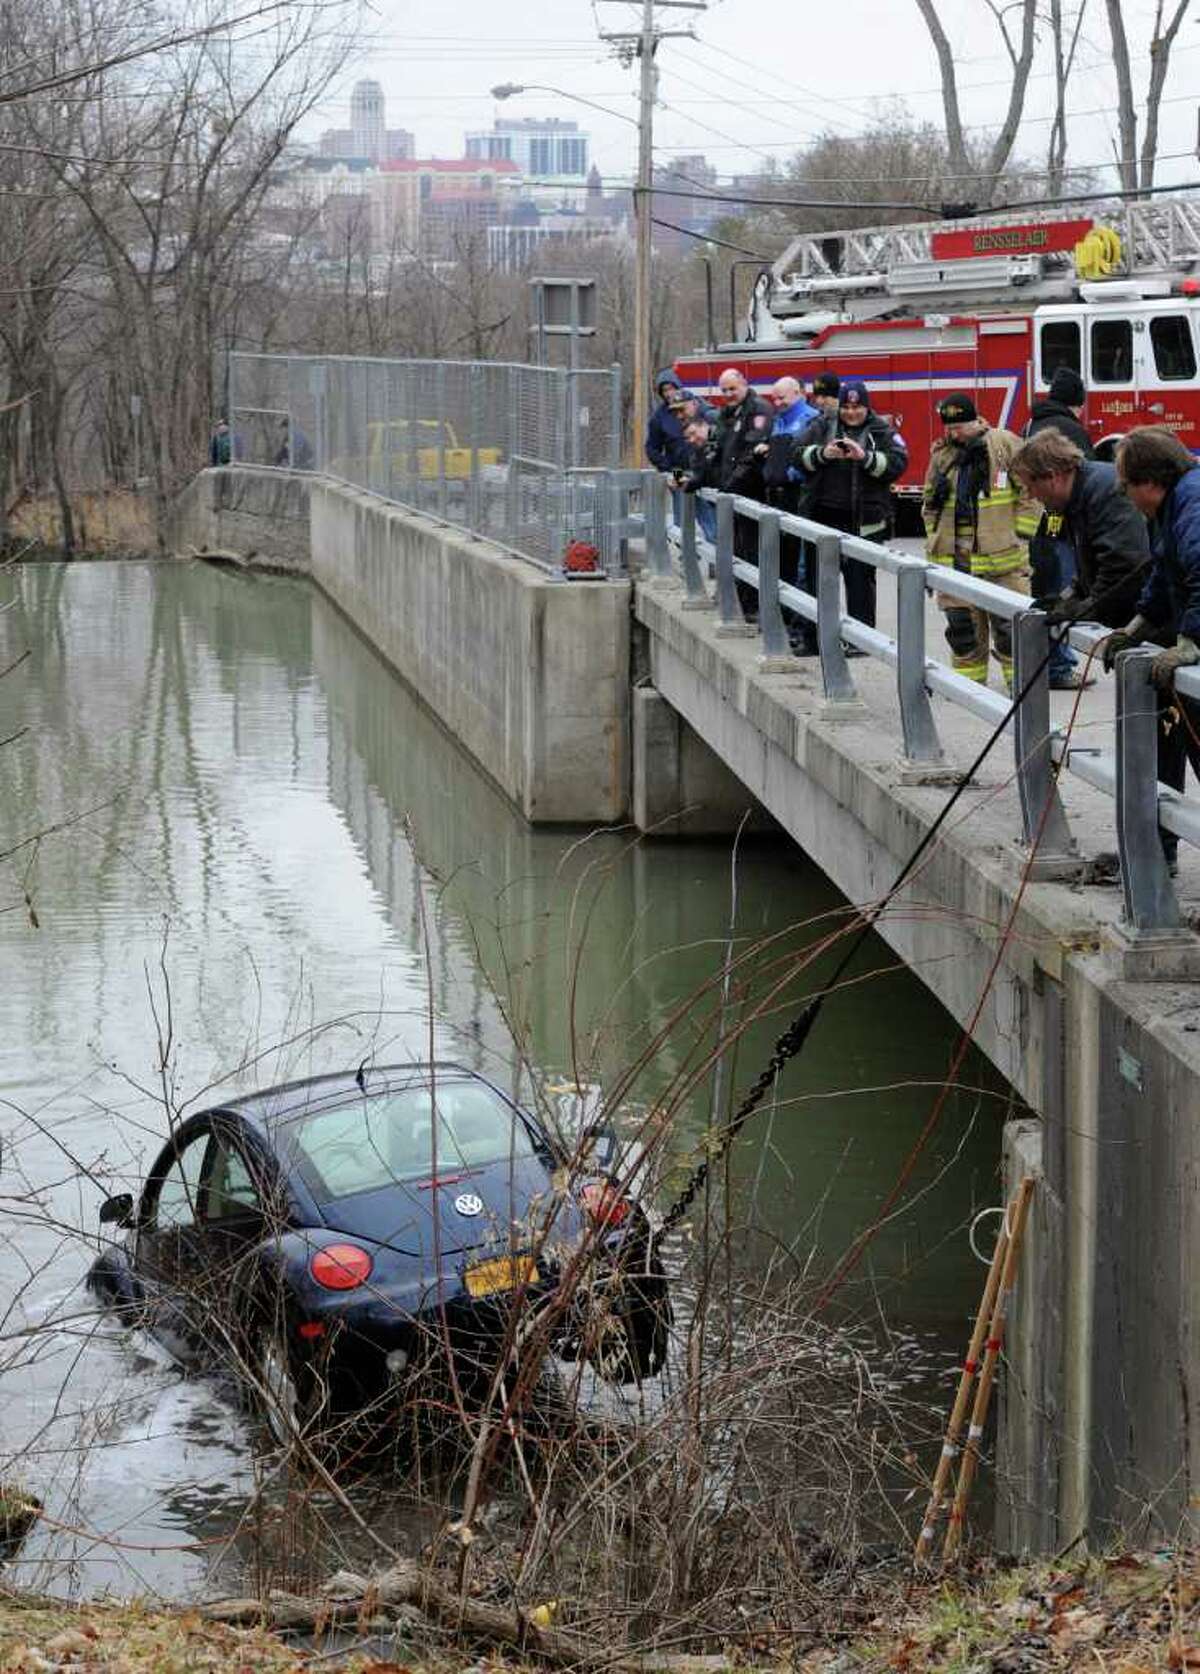 Members of the Clinton Heights Fire Department Rescue Squad work to remove a Volkswagen bug from the depths of the Red Mill Creek in Rensselaer, N.Y. Feb. 2, 2012. Geist towing was used to winch the vehicle from the creek. (Skip Dickstein / Times Union)